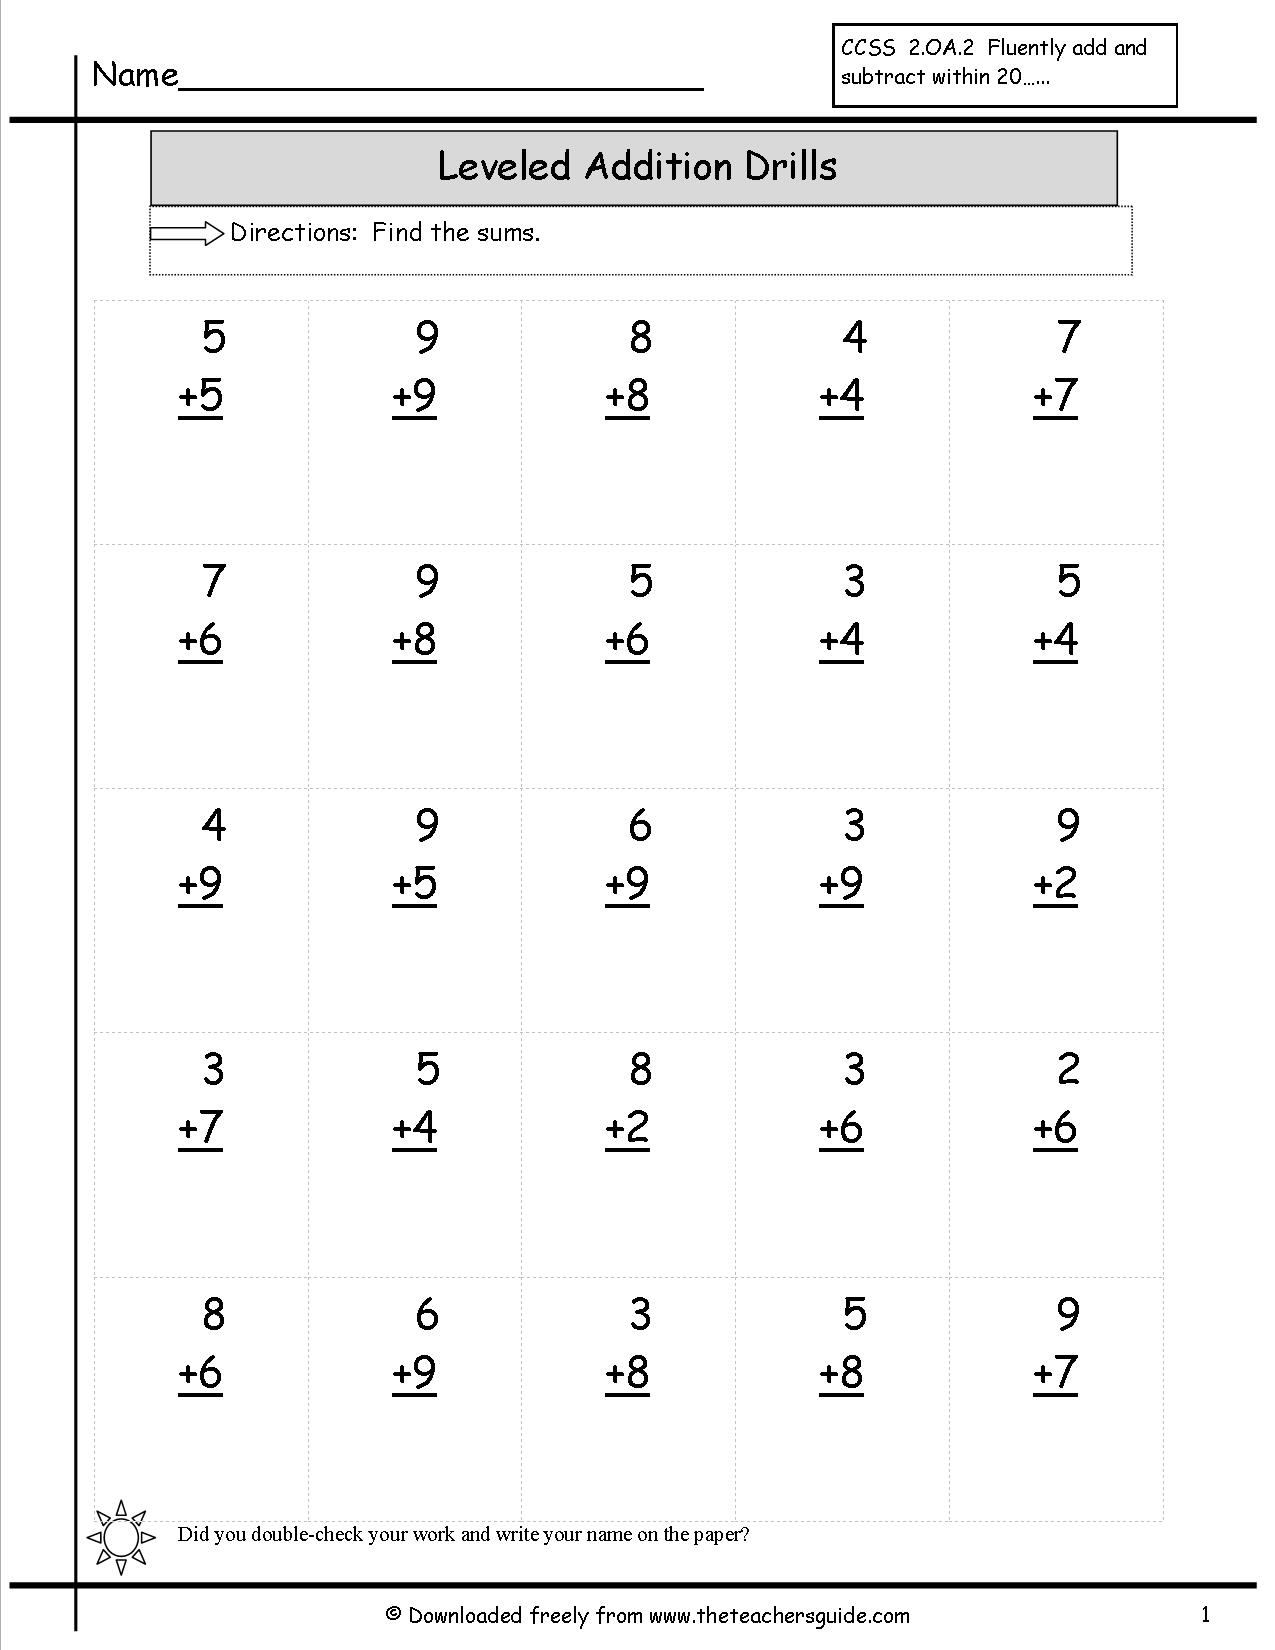 7 best images of printable math addition drill worksheets first grade